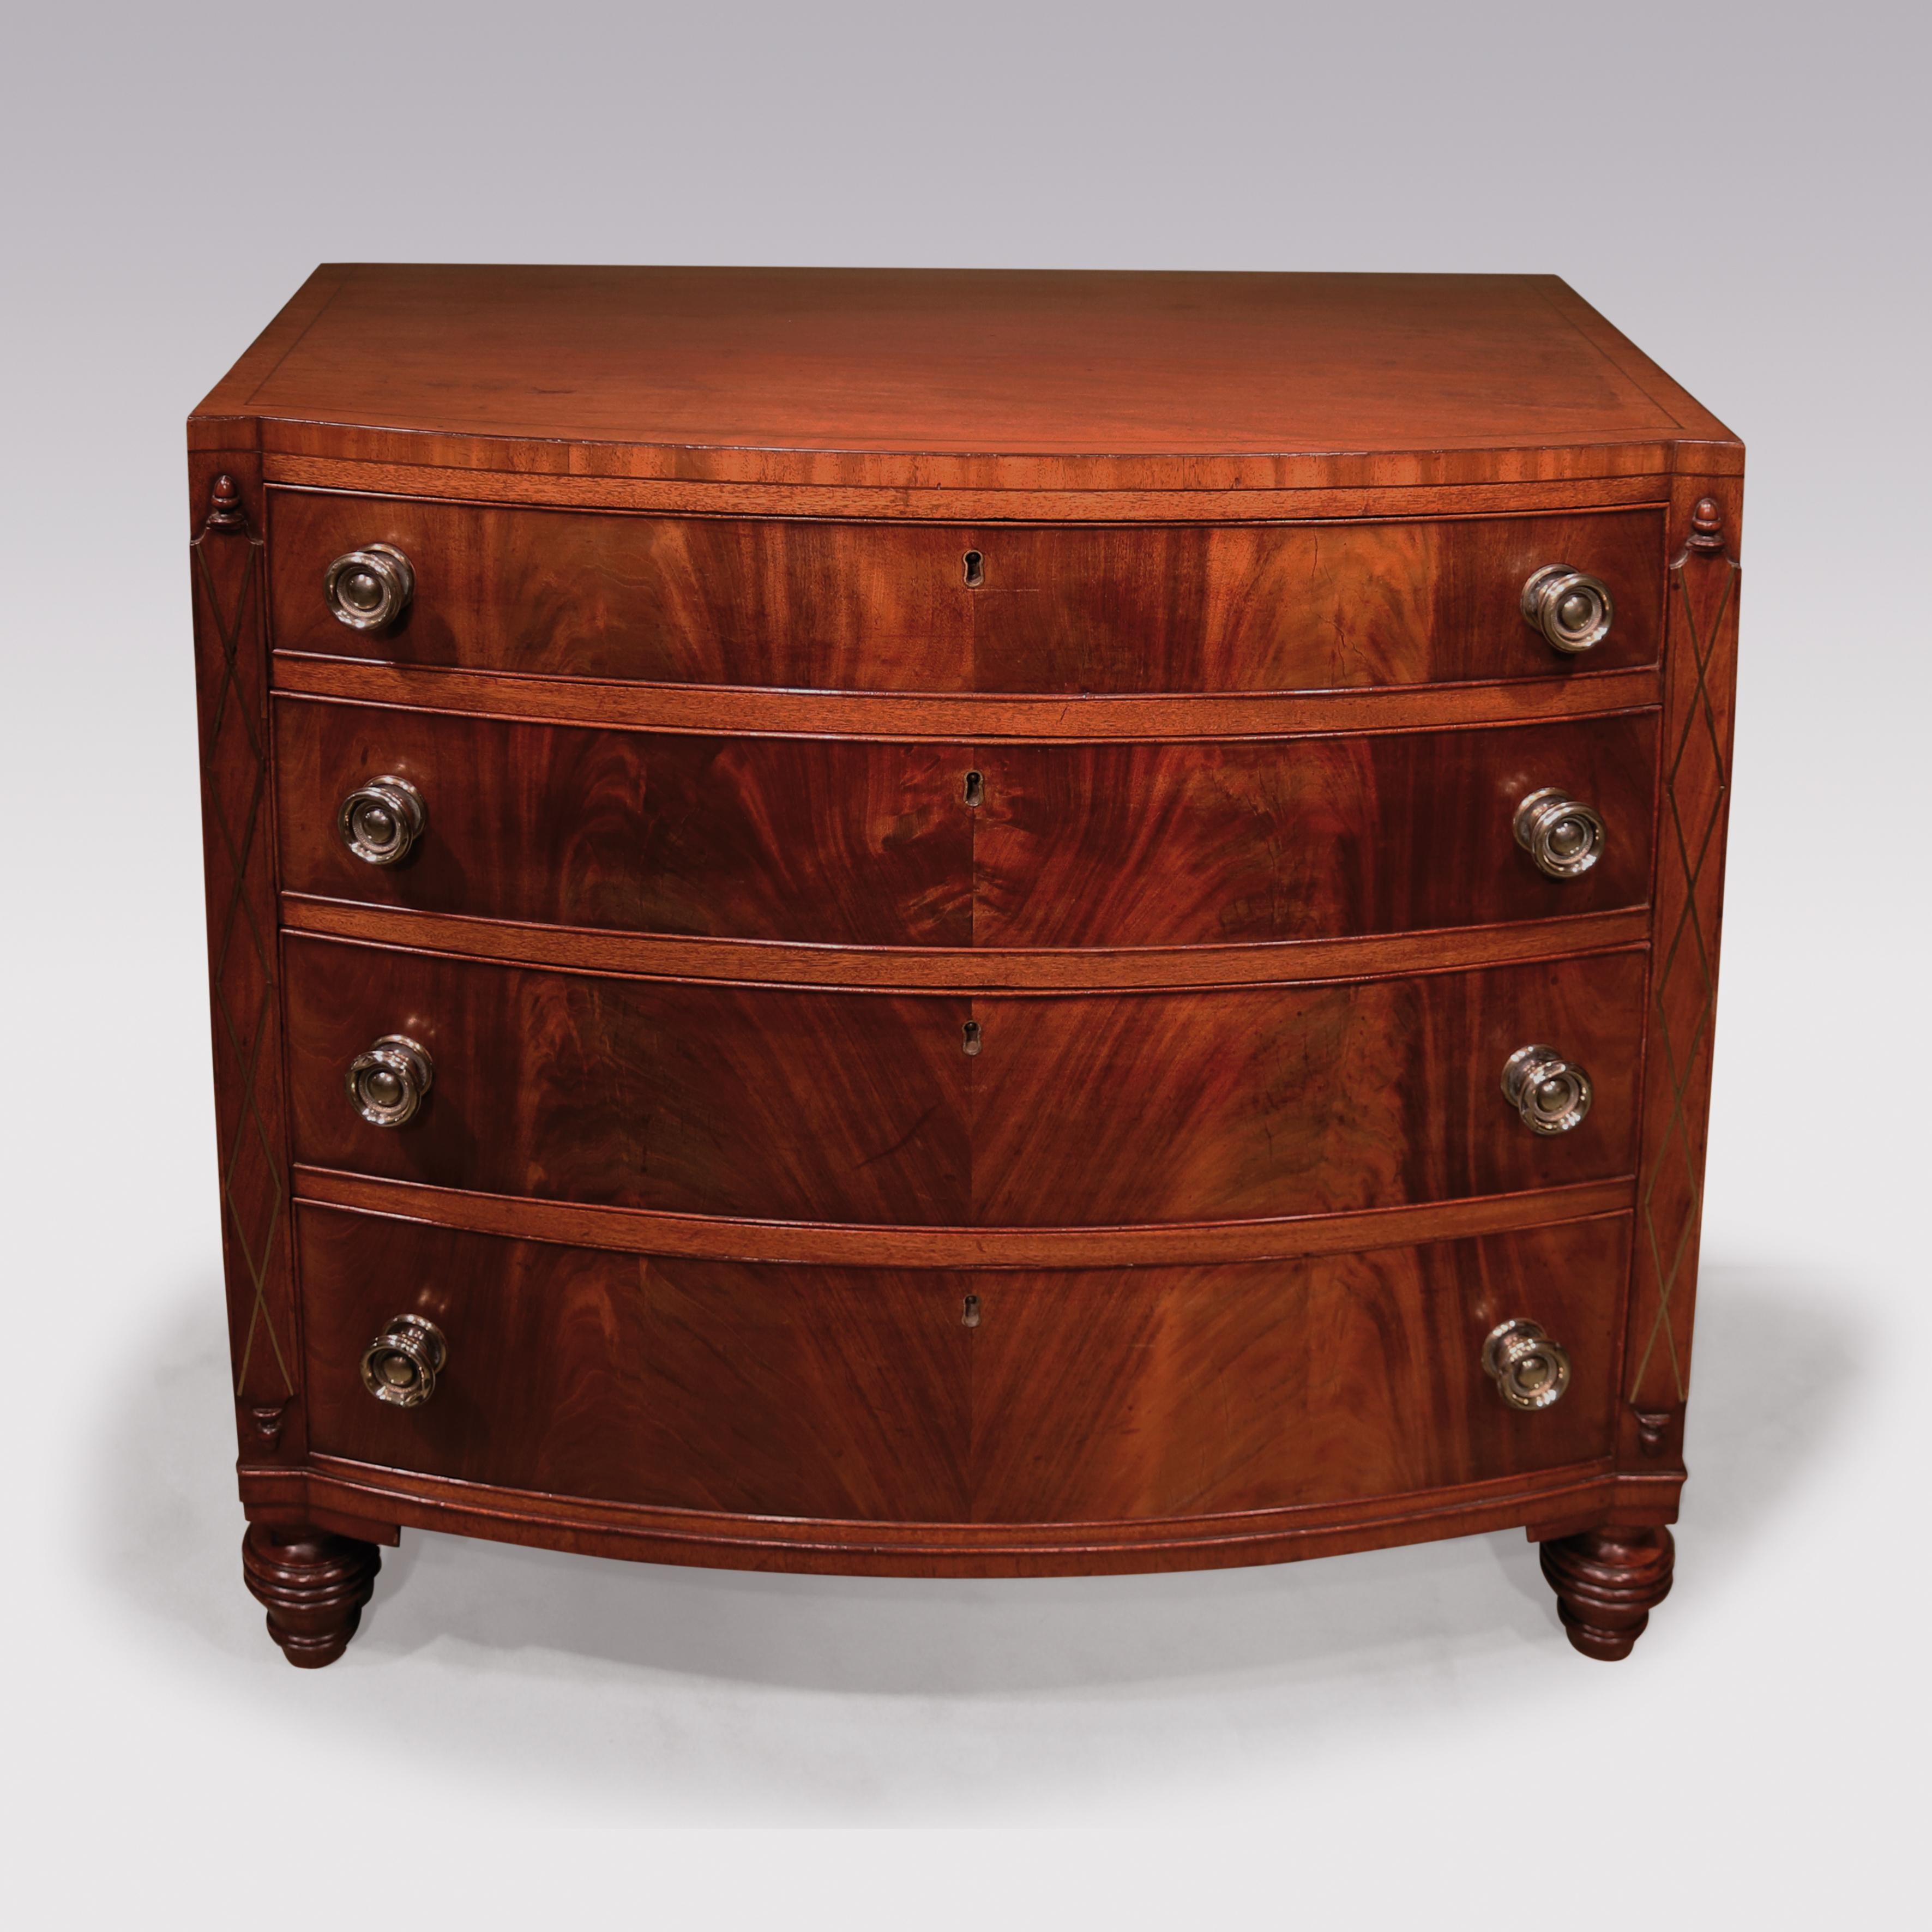 An early 19th century Regency period bow chest stamped ‘GILLOWS’ veneered in flame figured mahogany having ebony strung top above four cockbeaded drawers, retaining original brass handles, flanked by lattice brass inlaid ‘columns’ with acorn